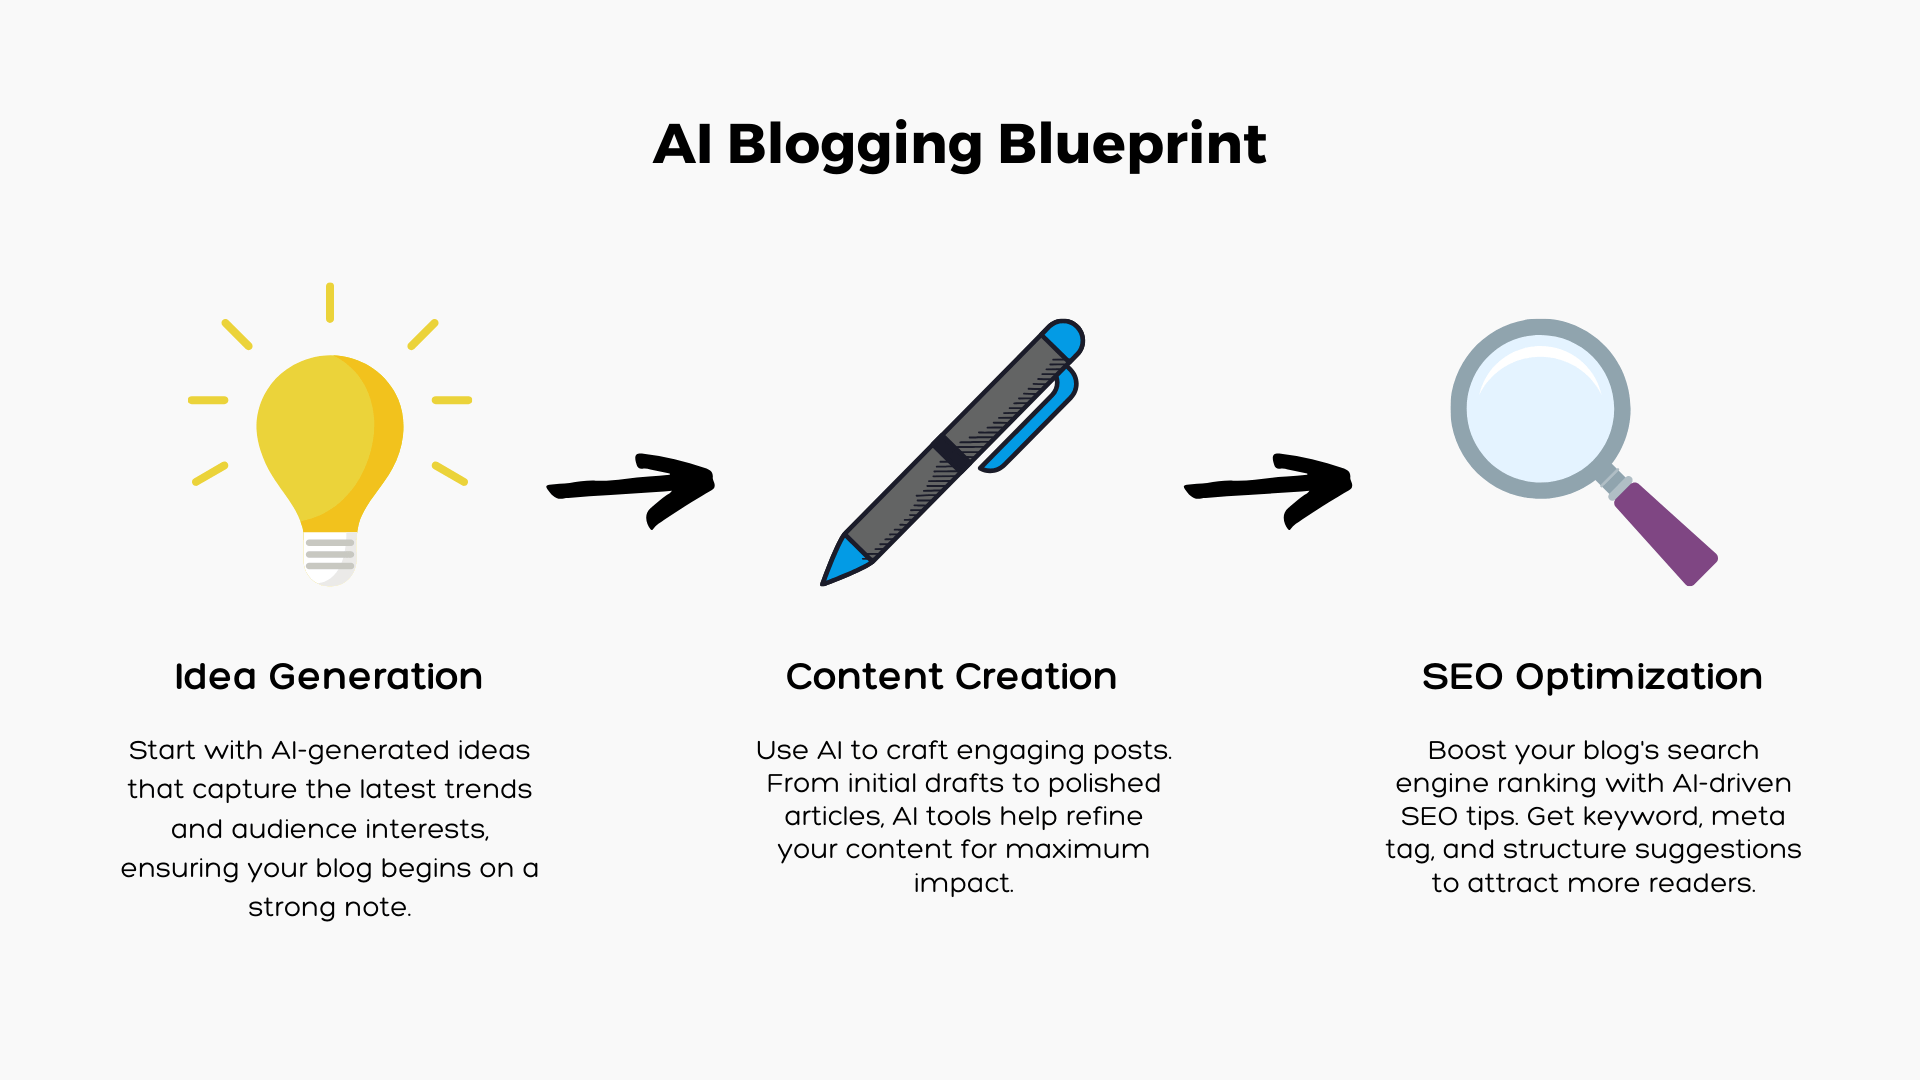 uses of ai in blogging including content creation, idea generation, and SEO